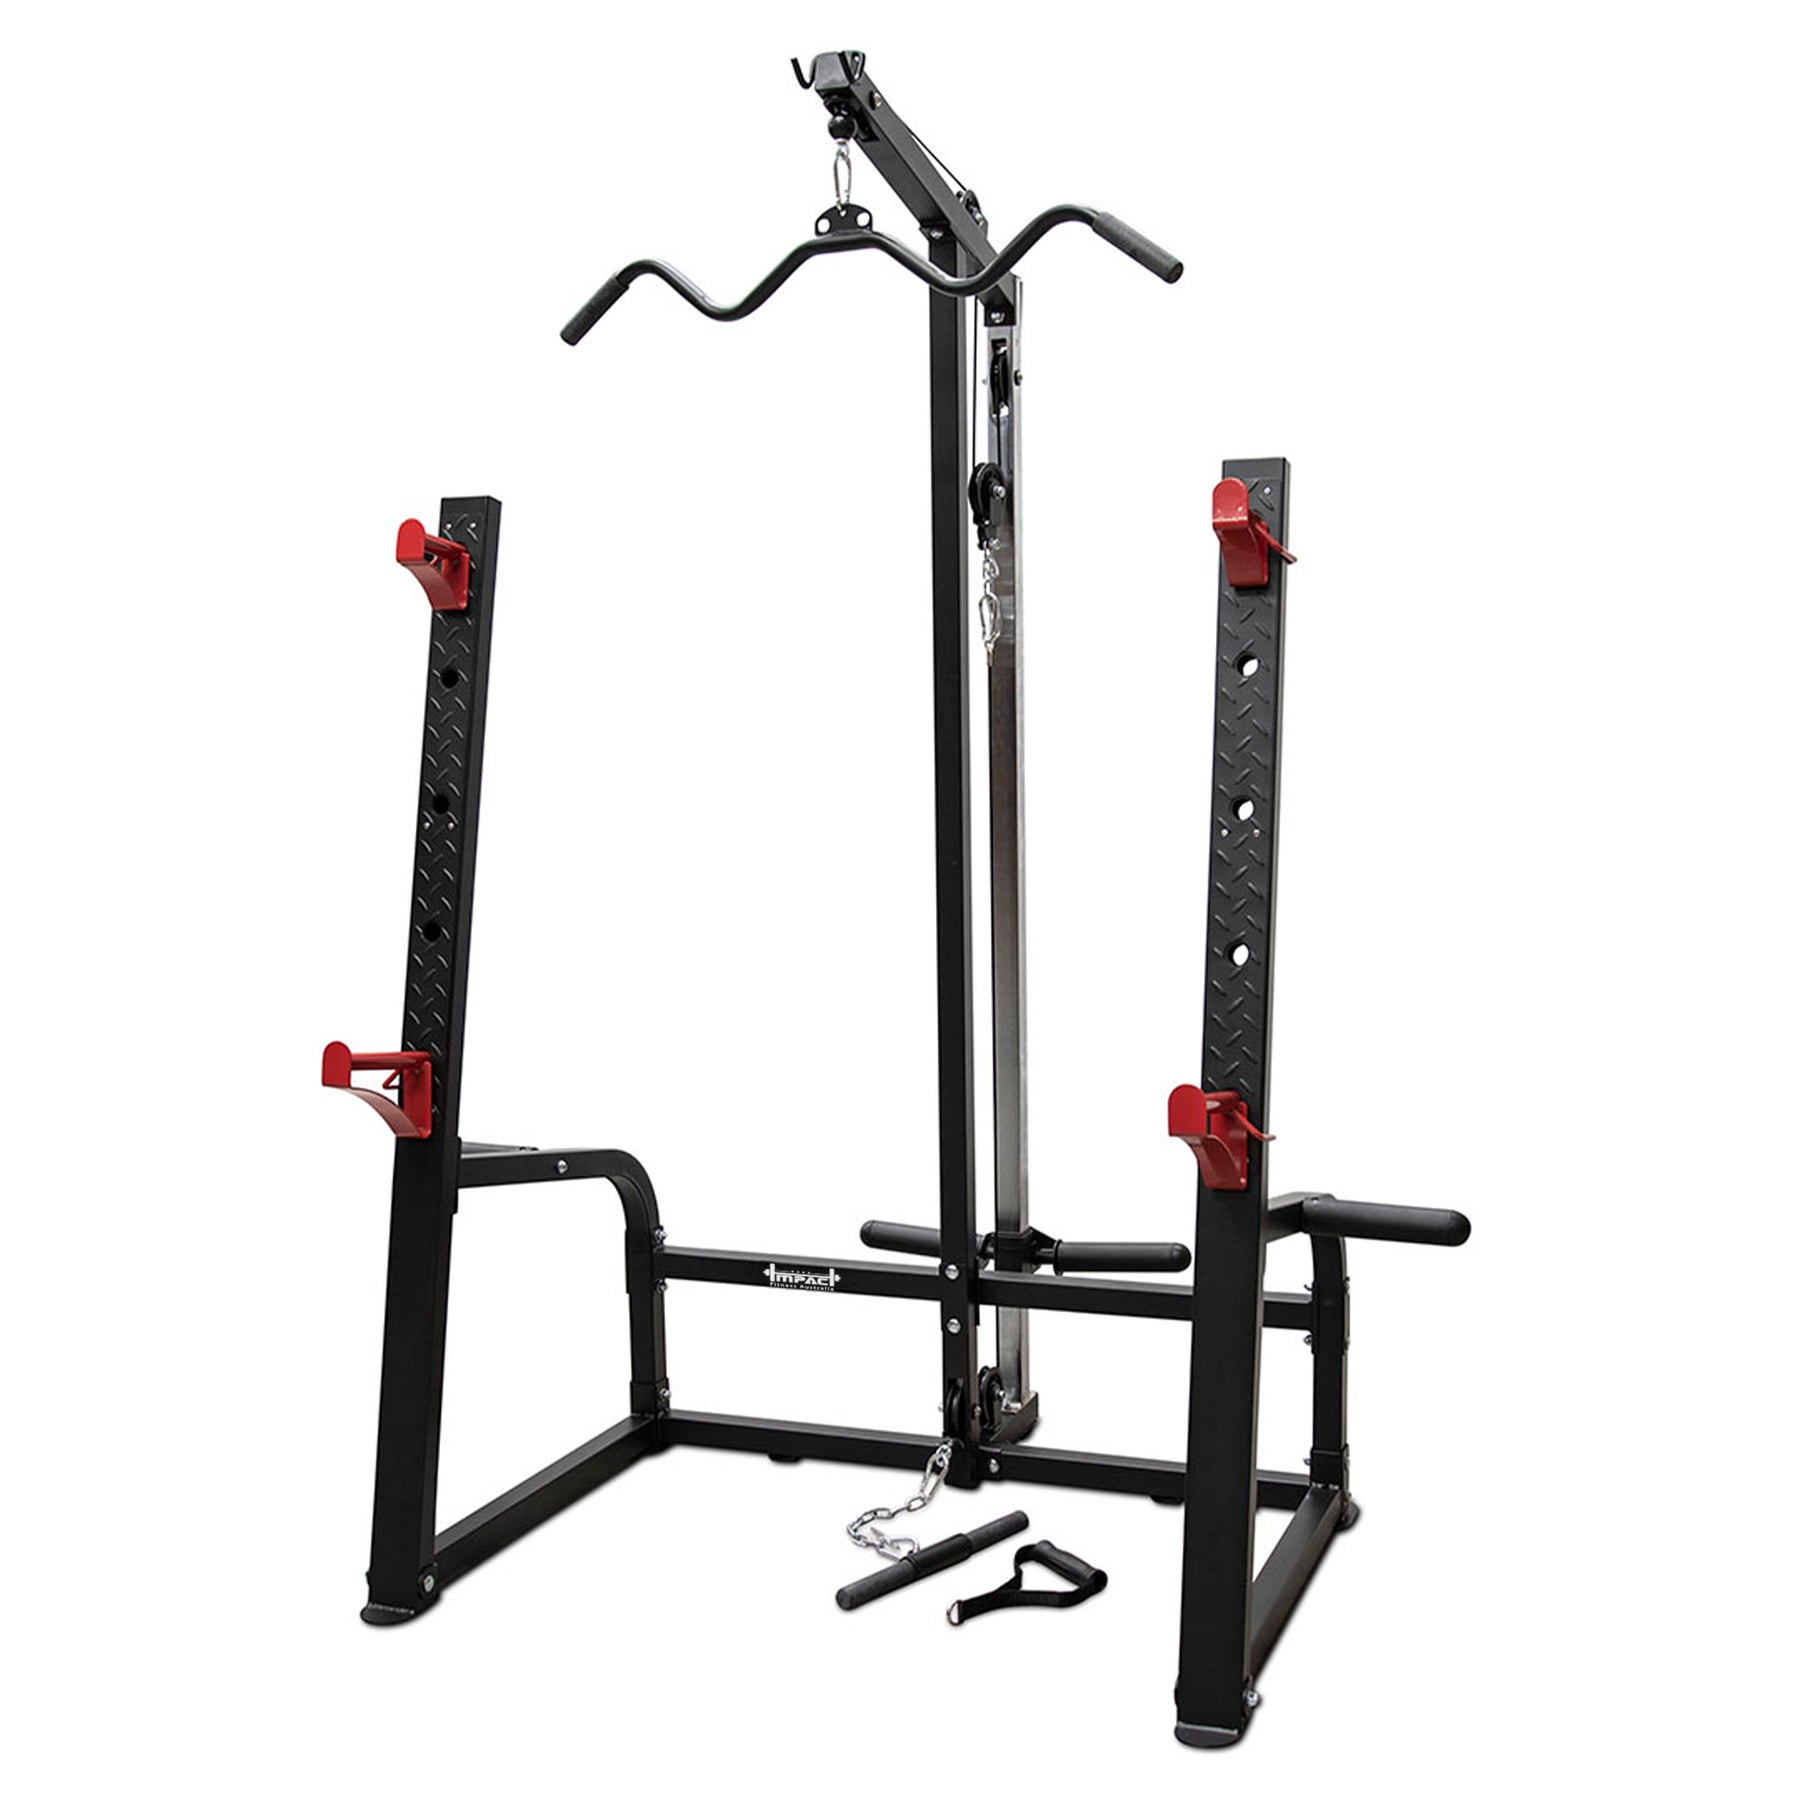 Impact Fitness Squat Rack Lat Pulldown + Adjustable Bench + 120kg Olympic Pro Bumper Weight Set